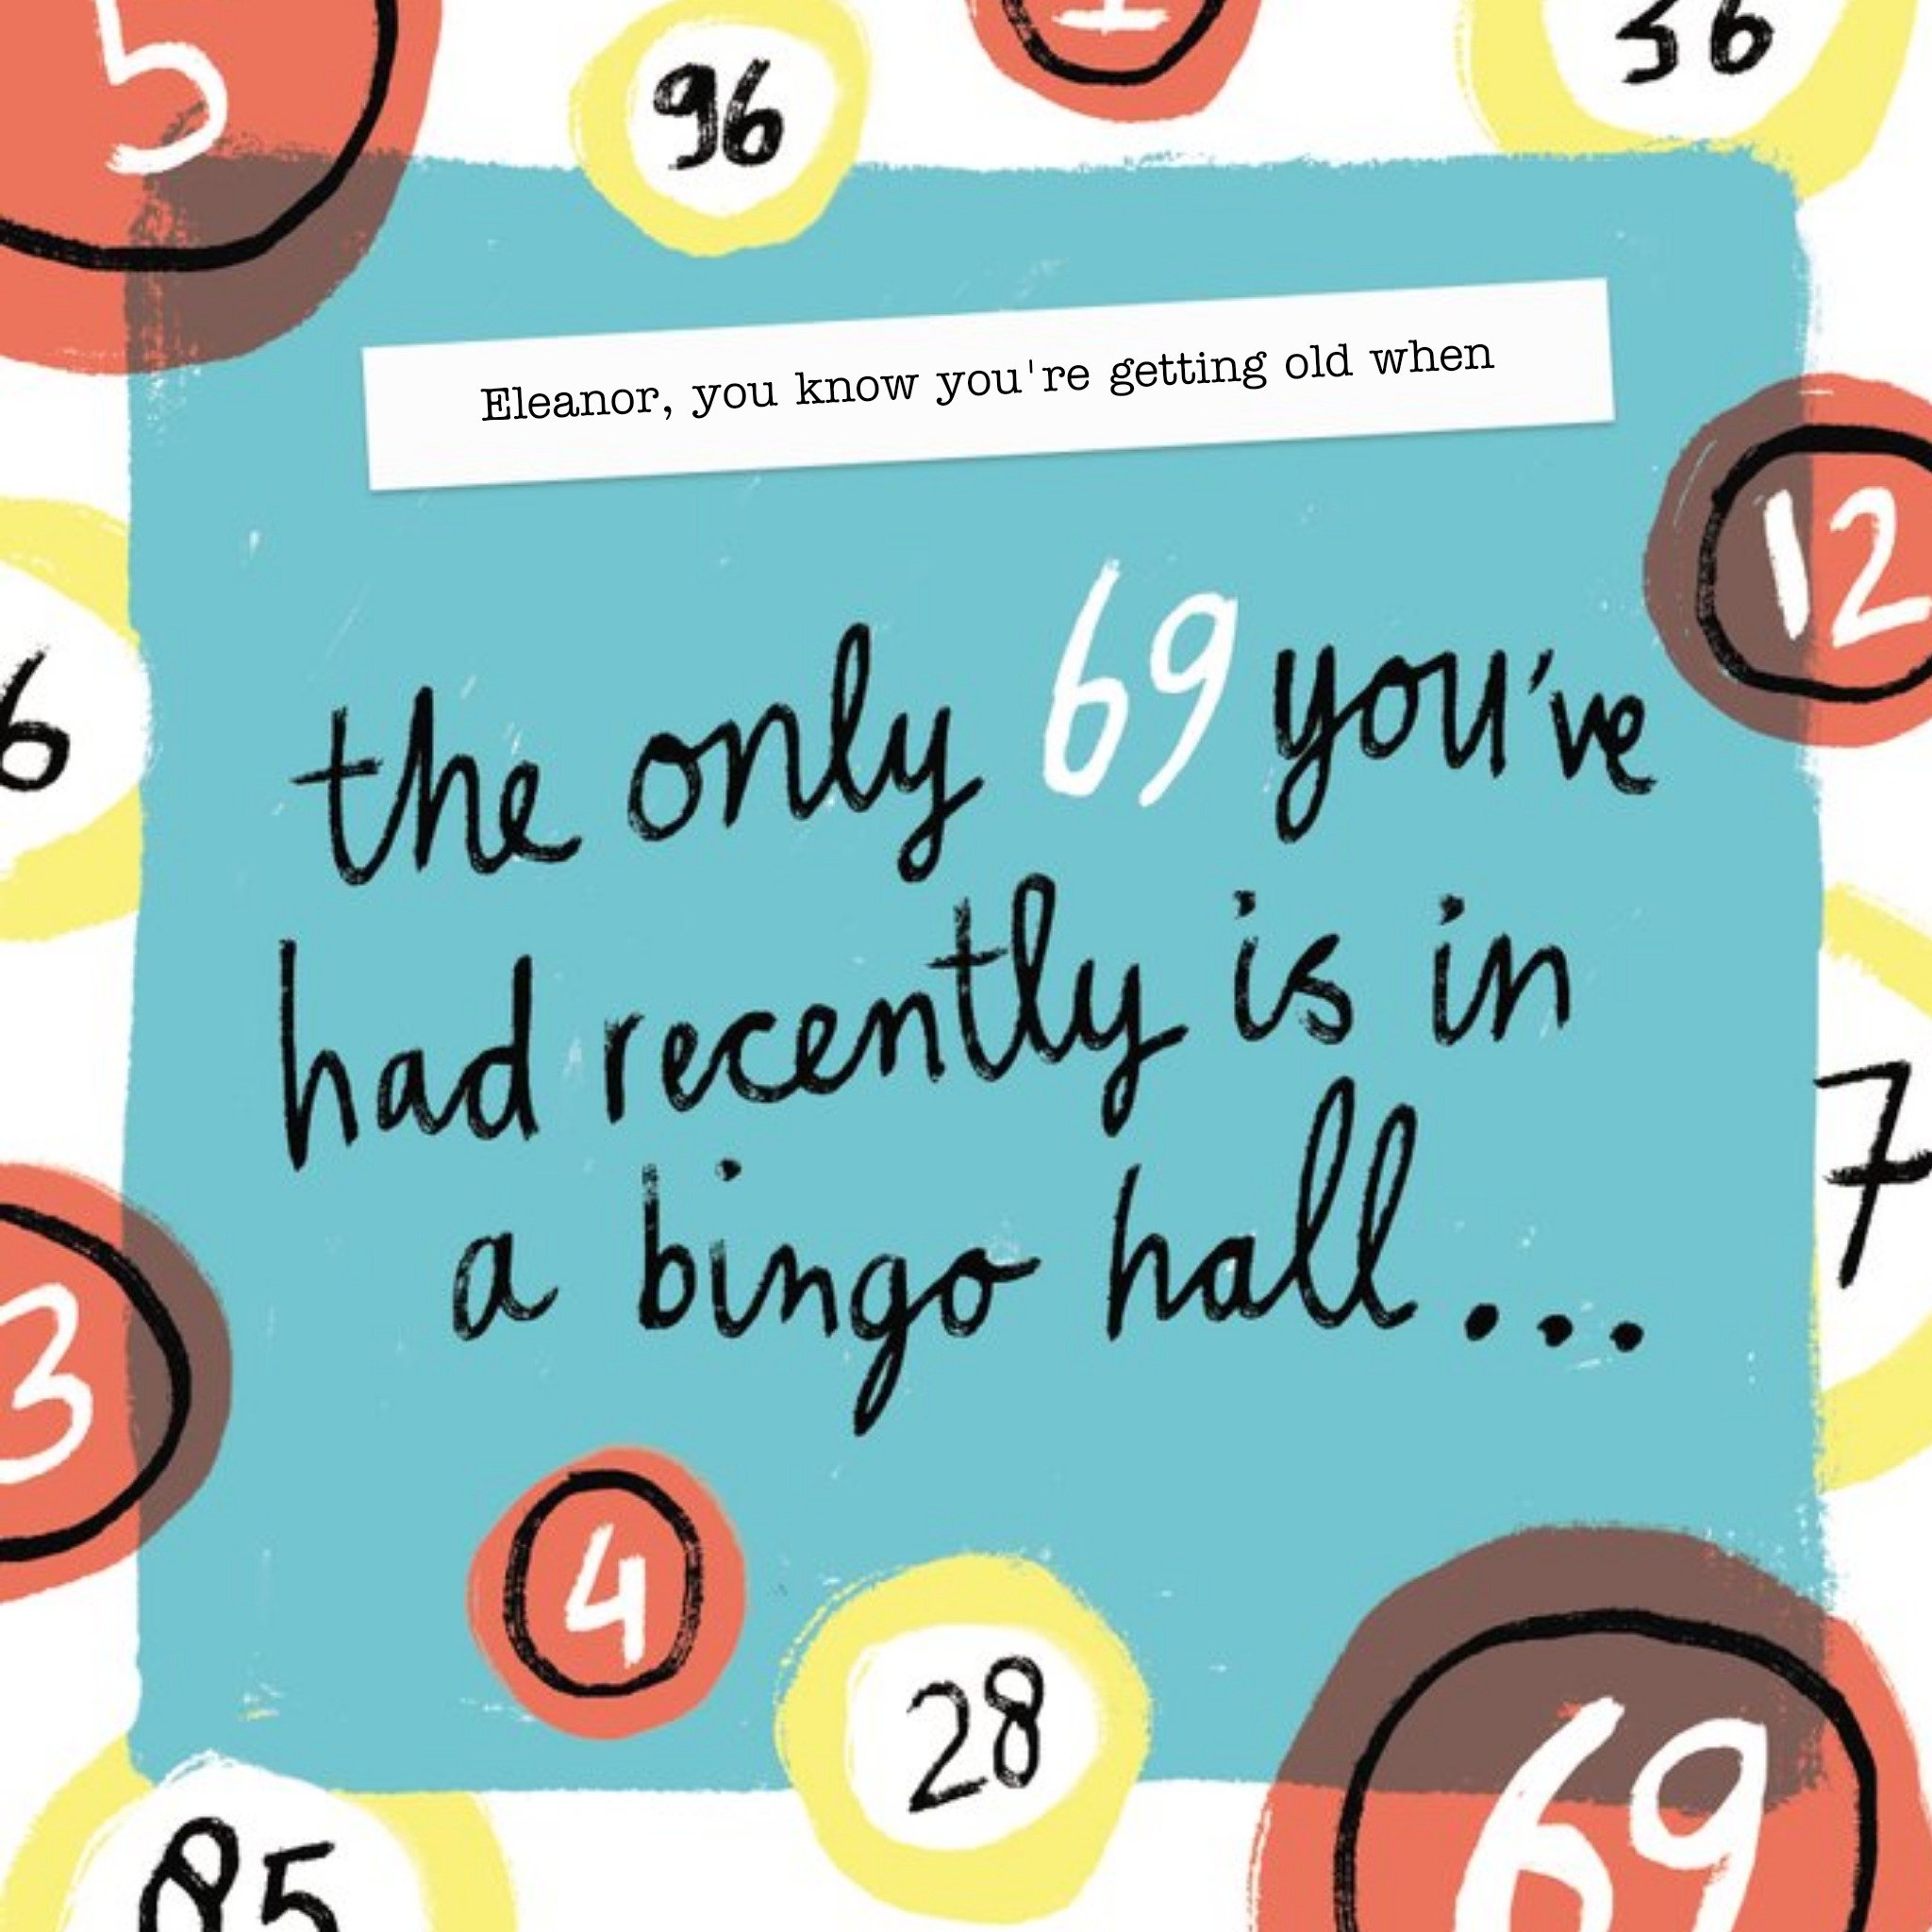 Moonpig The Only 69 Youve Had Recently Is In A Bingo Hall Funny Birthday Card, Large